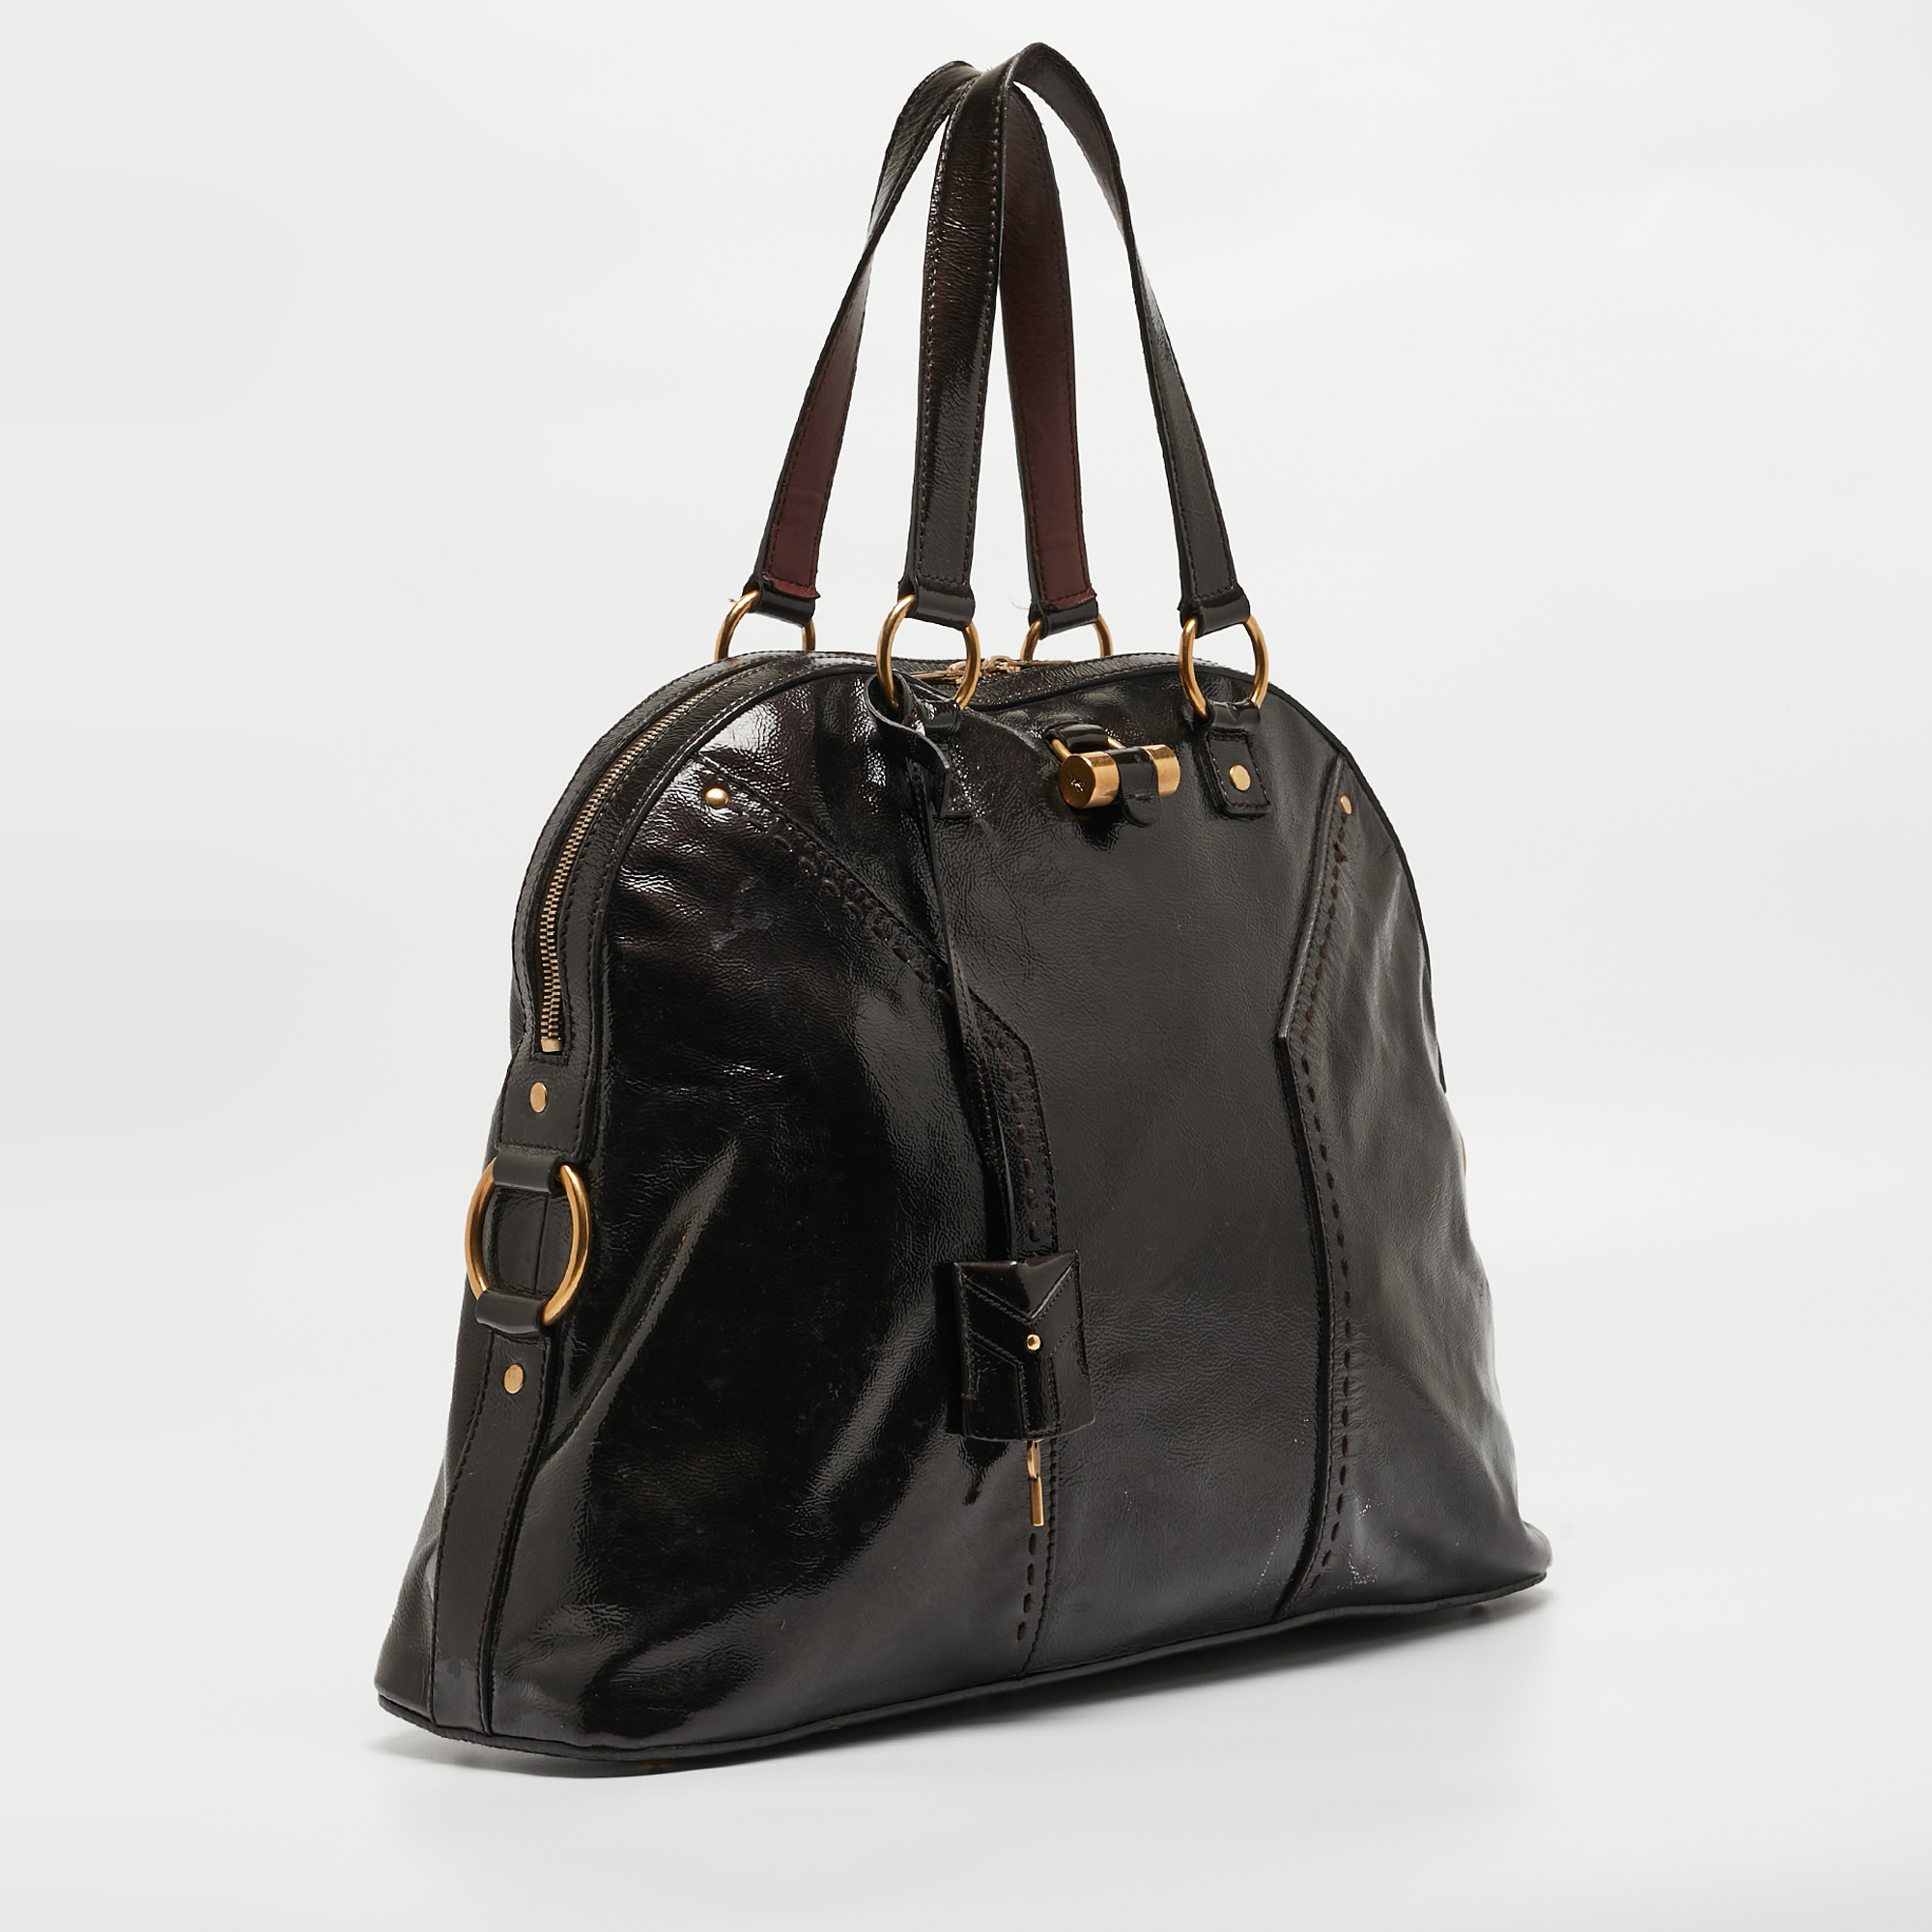 Yves Saint Laurent Choco Brown Patent Leather Oversized Muse Bag